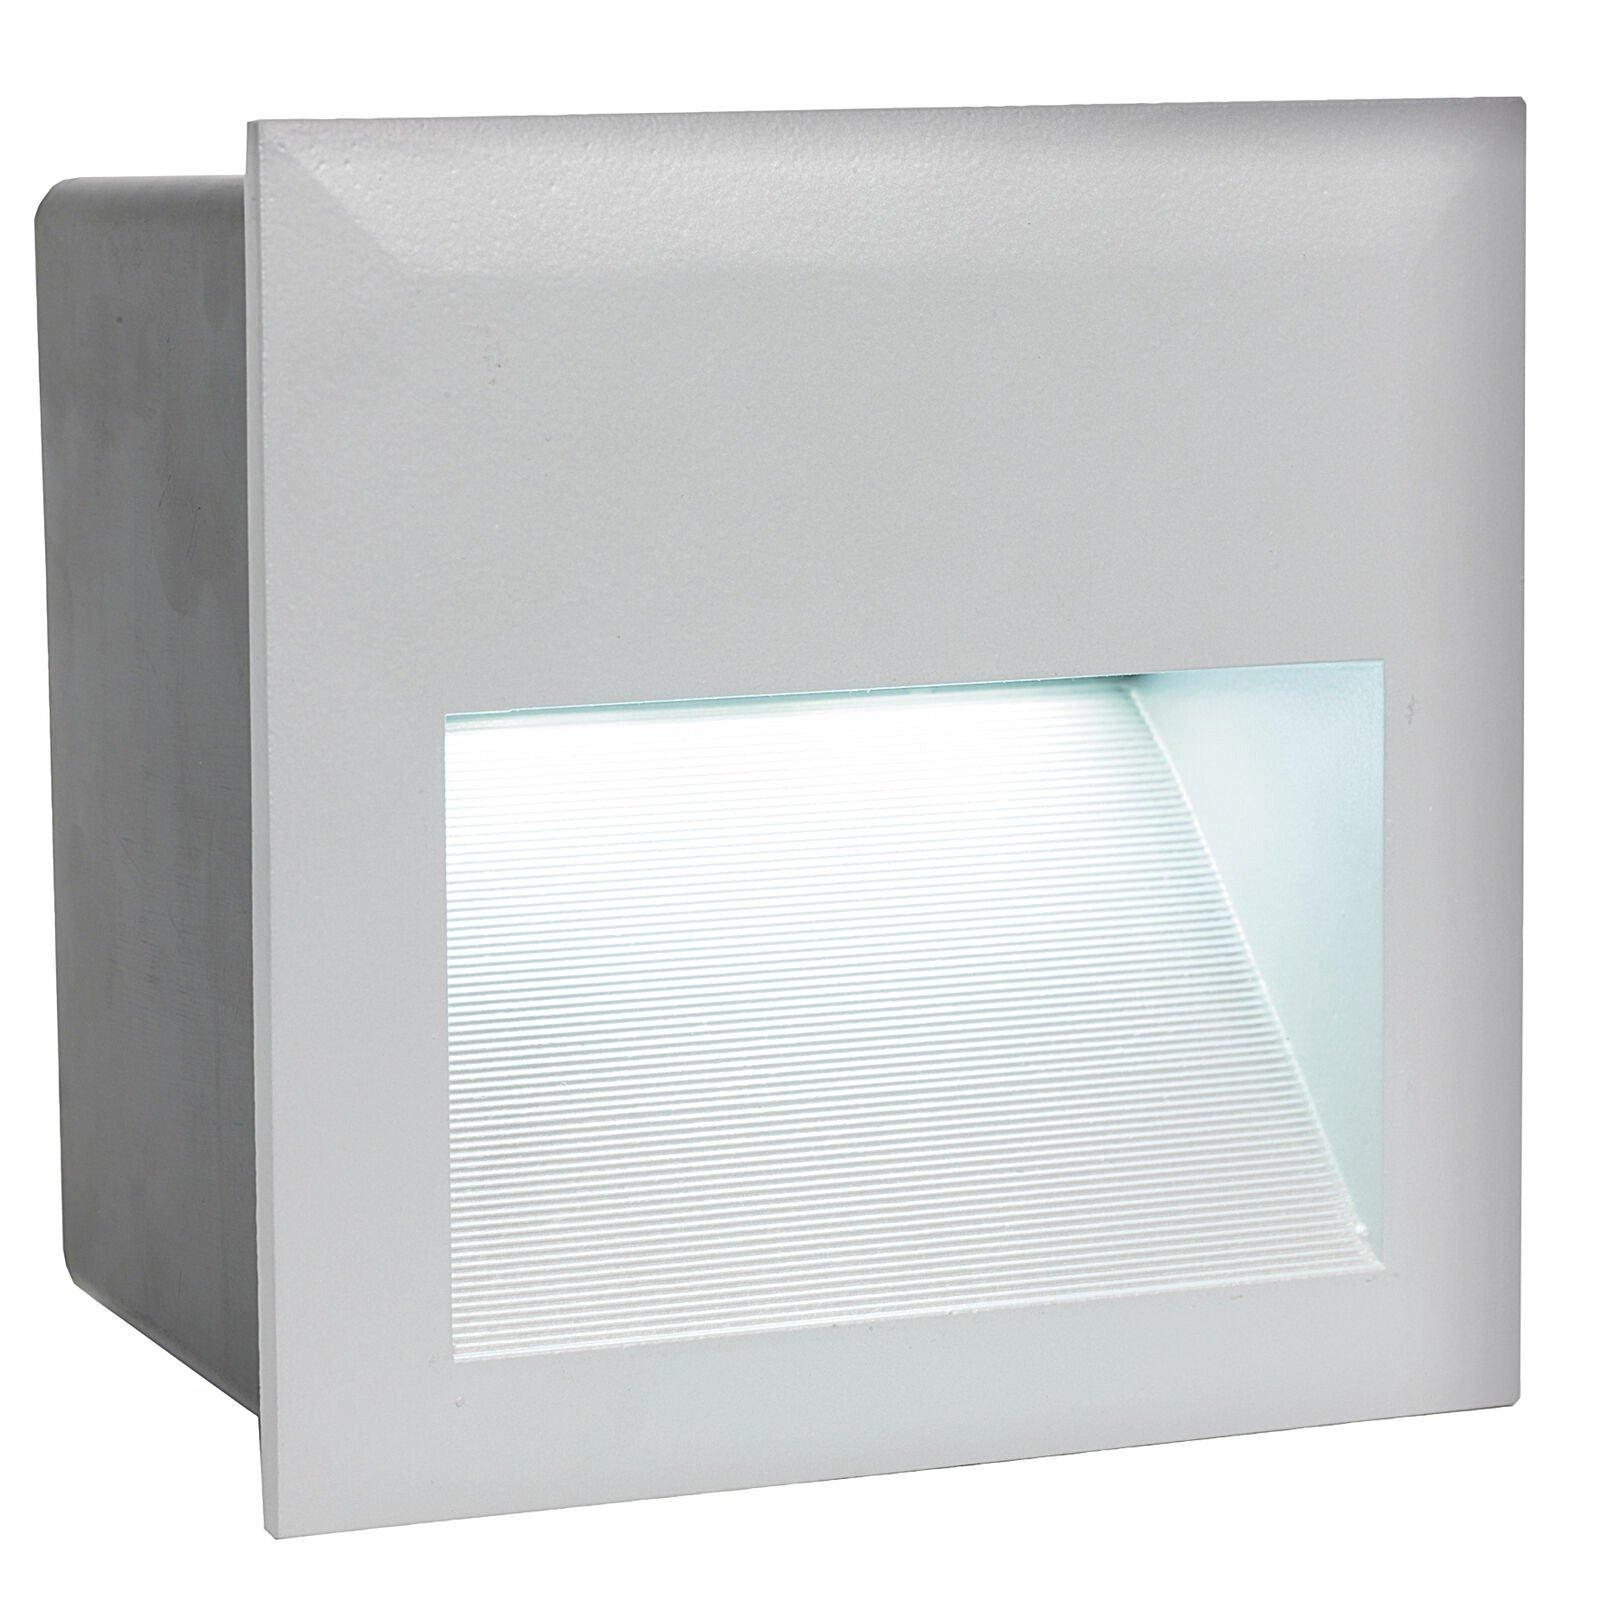 IP65 Recessed Outdoor Wall Light Silver Cast Aluminium 3.7W Built in LED